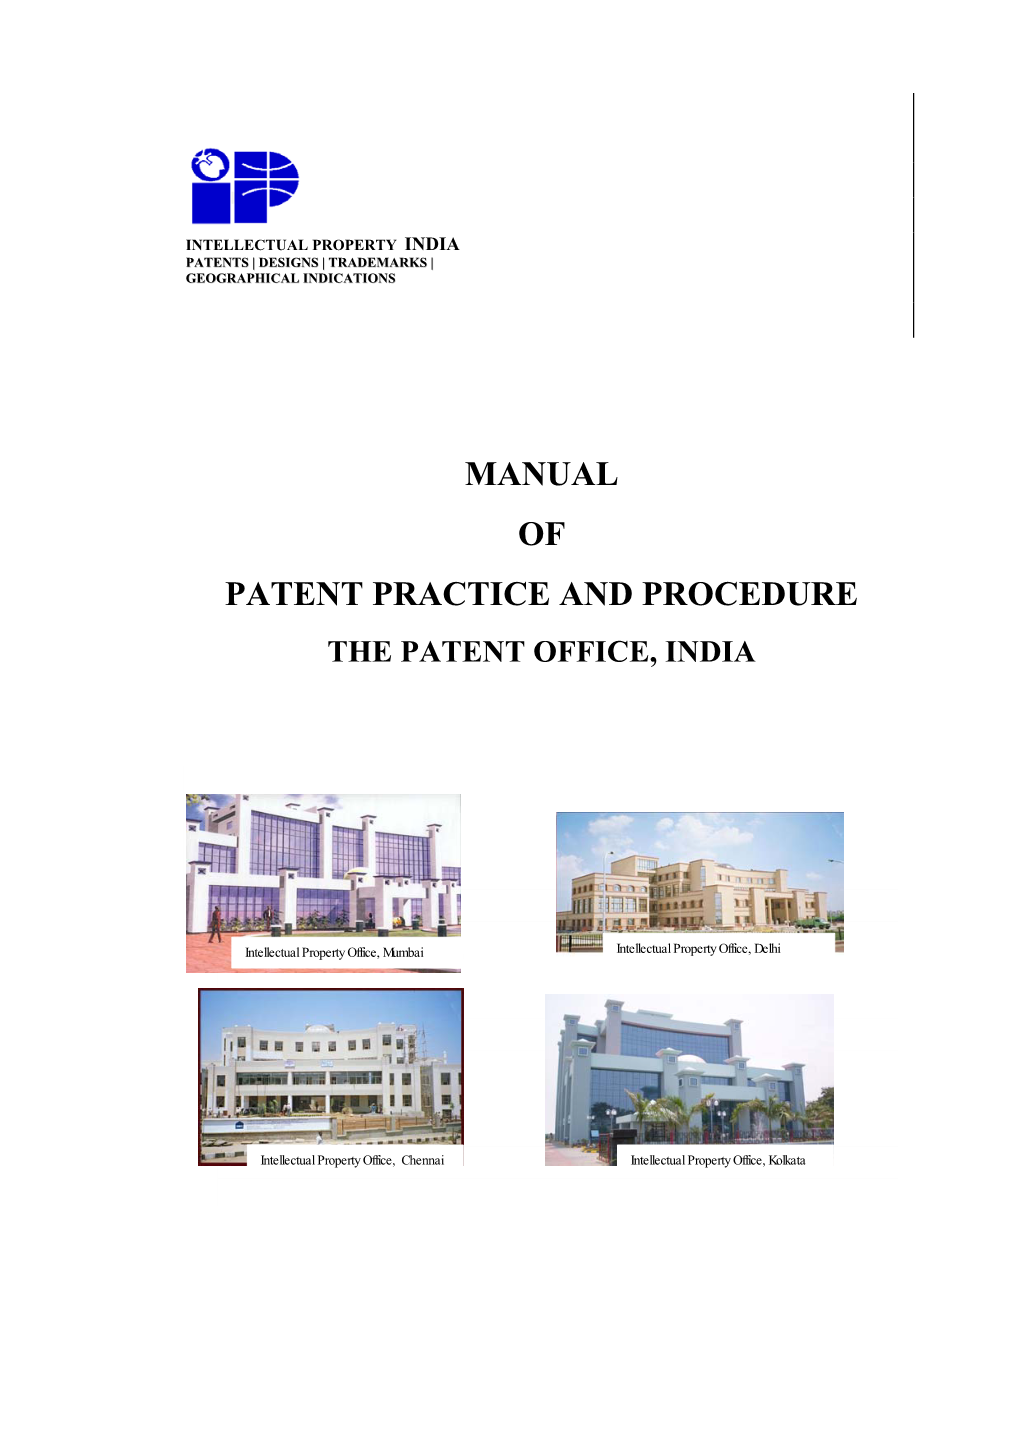 Manual of Patent Practice and Procedure the Patent Office, India